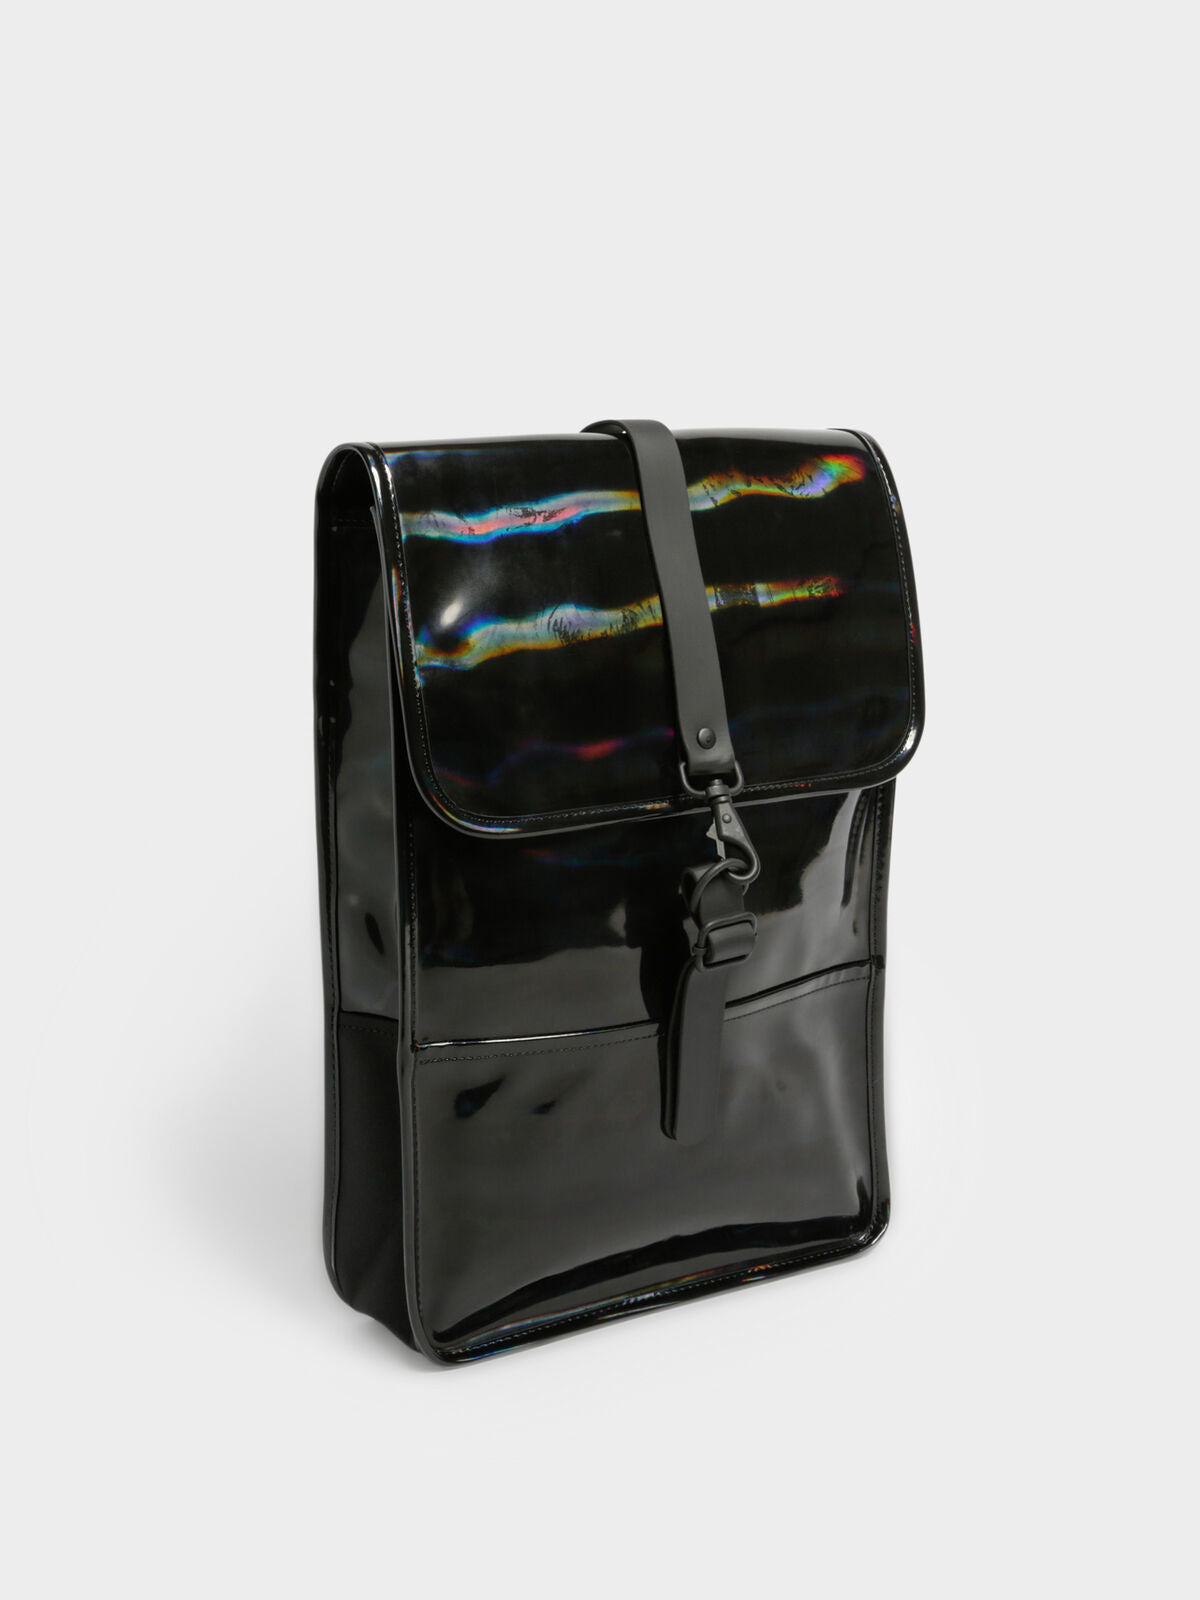 Mini Backpack in Holographic Black